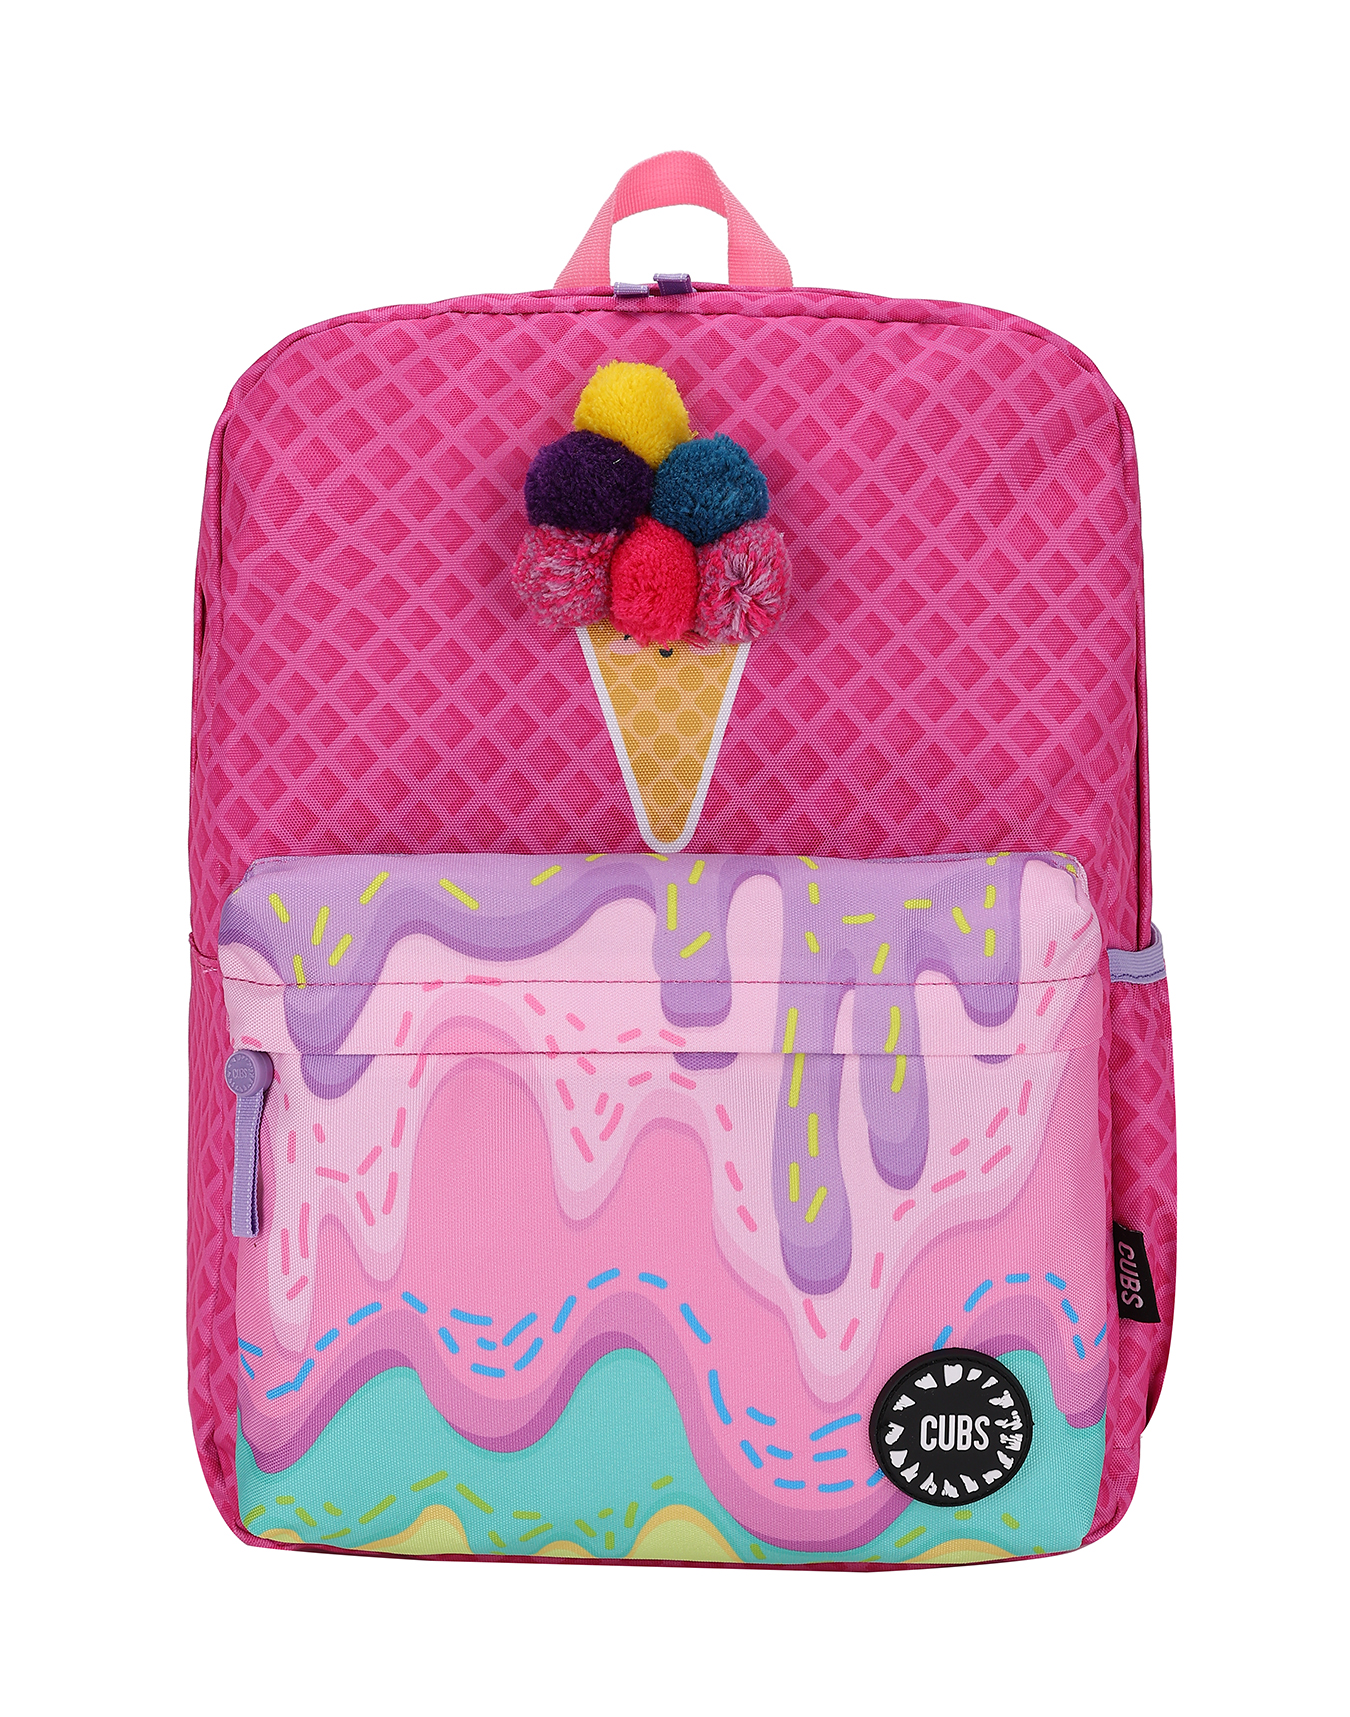 Junior Student 18Inch Backpack -Pink Ice Cream